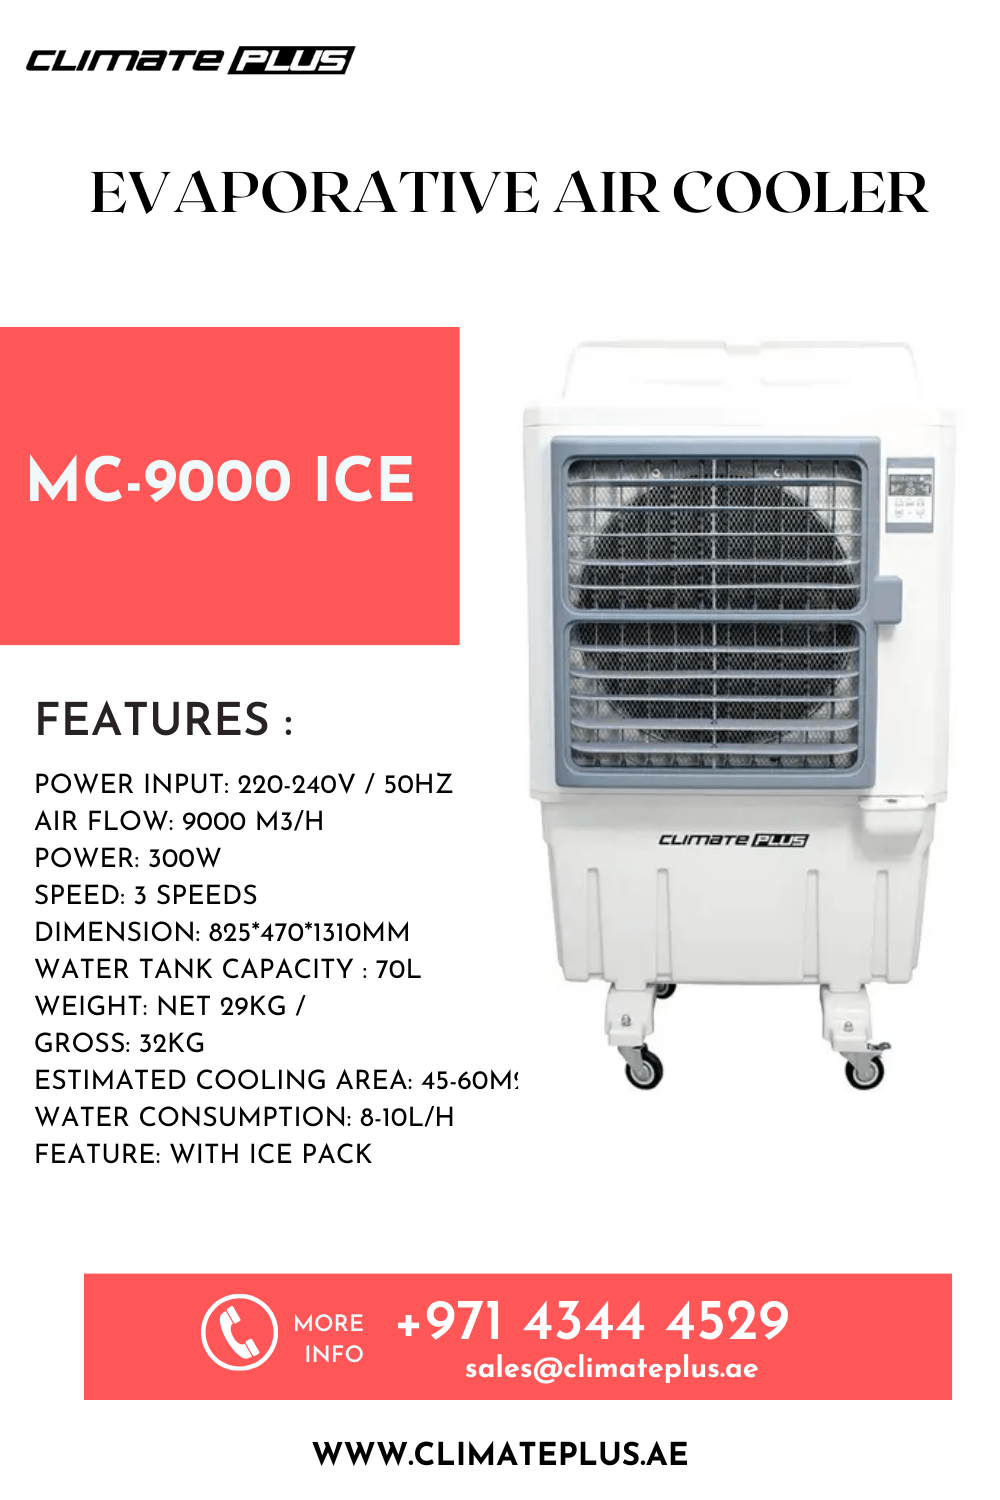 Stay Cool this Summer with Climate Plus Evaporative Air Coolers for commercial and industrial - Dubai Industrial Machineries